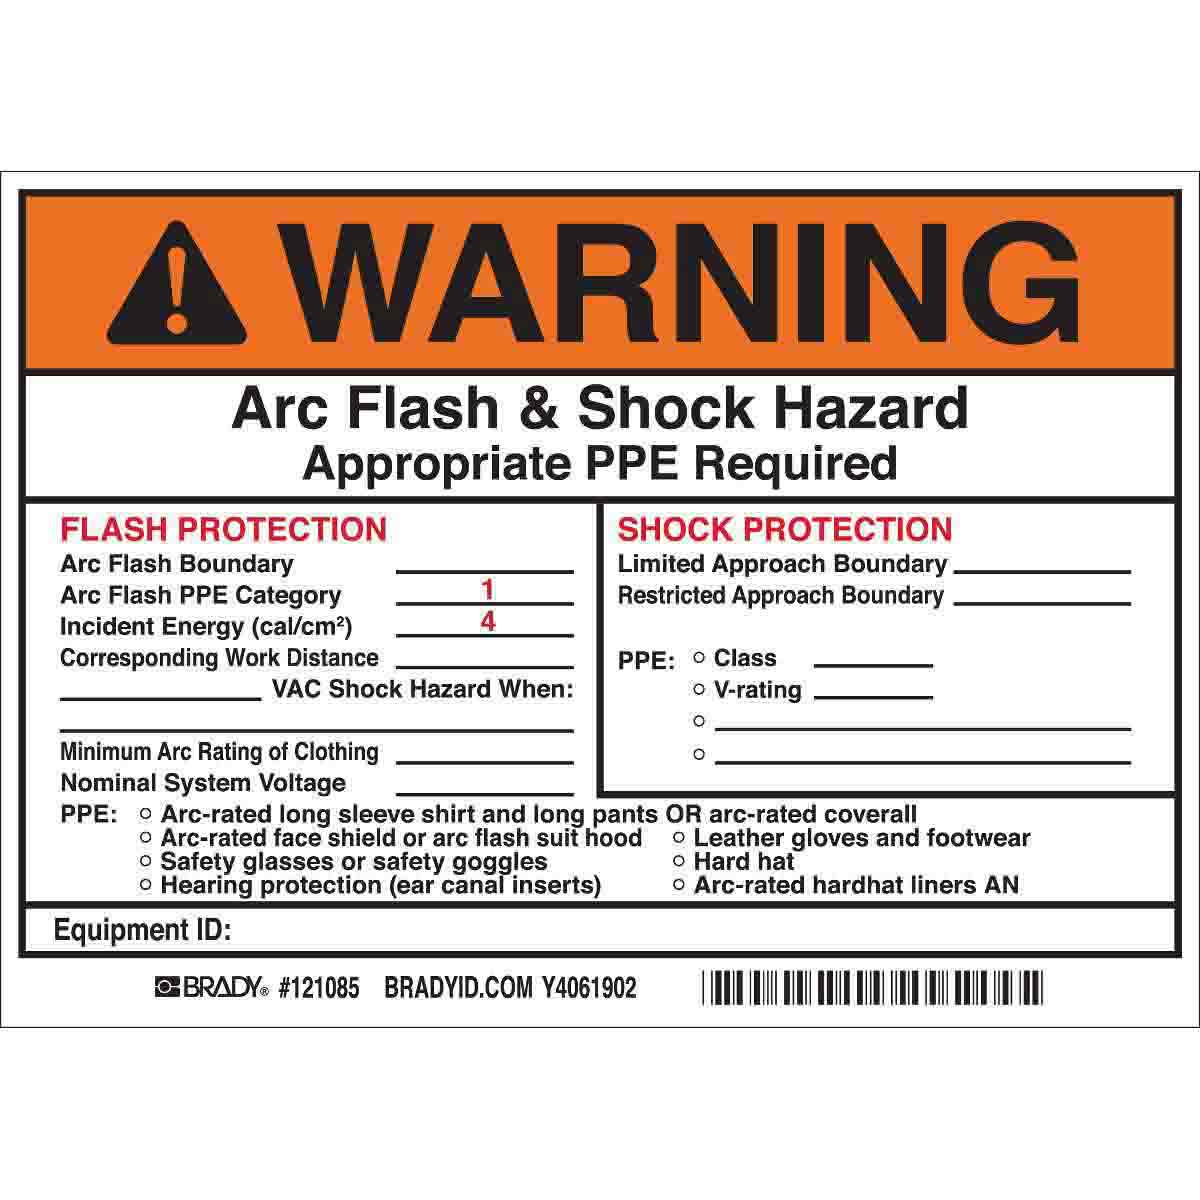 what is an arc flash boundary